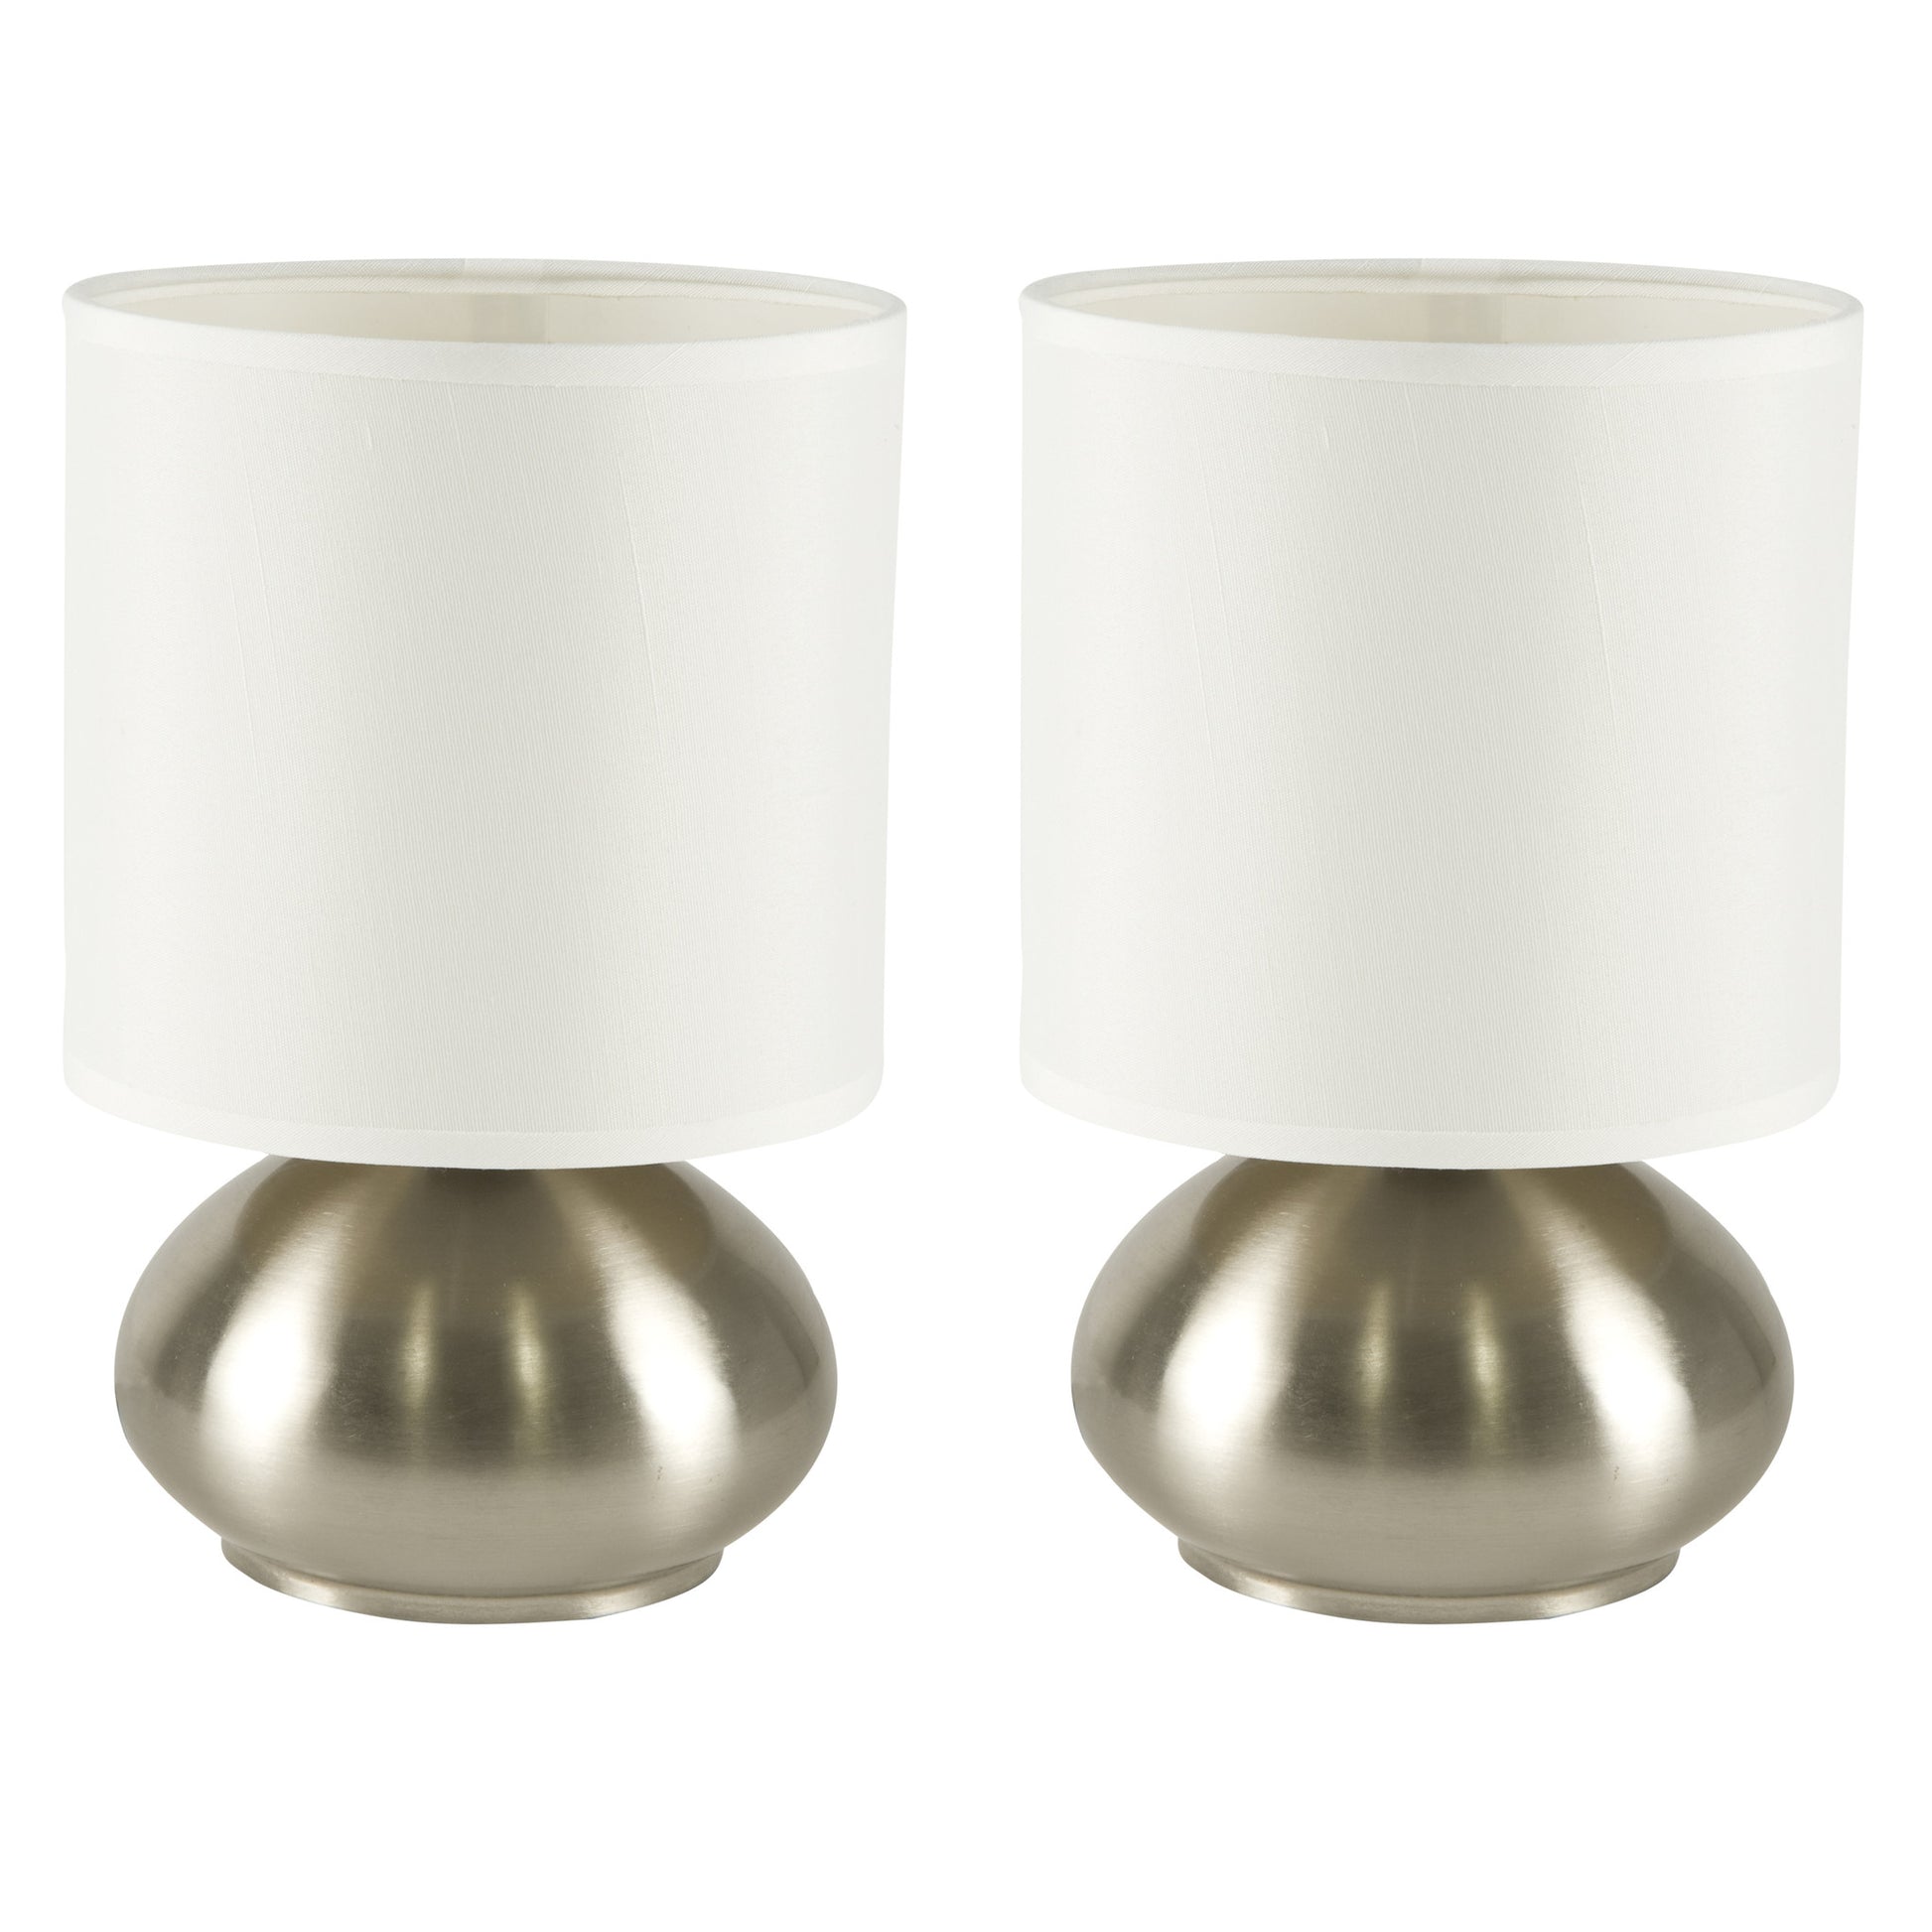 Light Accents Bedroom Side Table Lamps with 3-way Switch Brushed Nickel (Set of 2) - LightAccents.com
 - 1